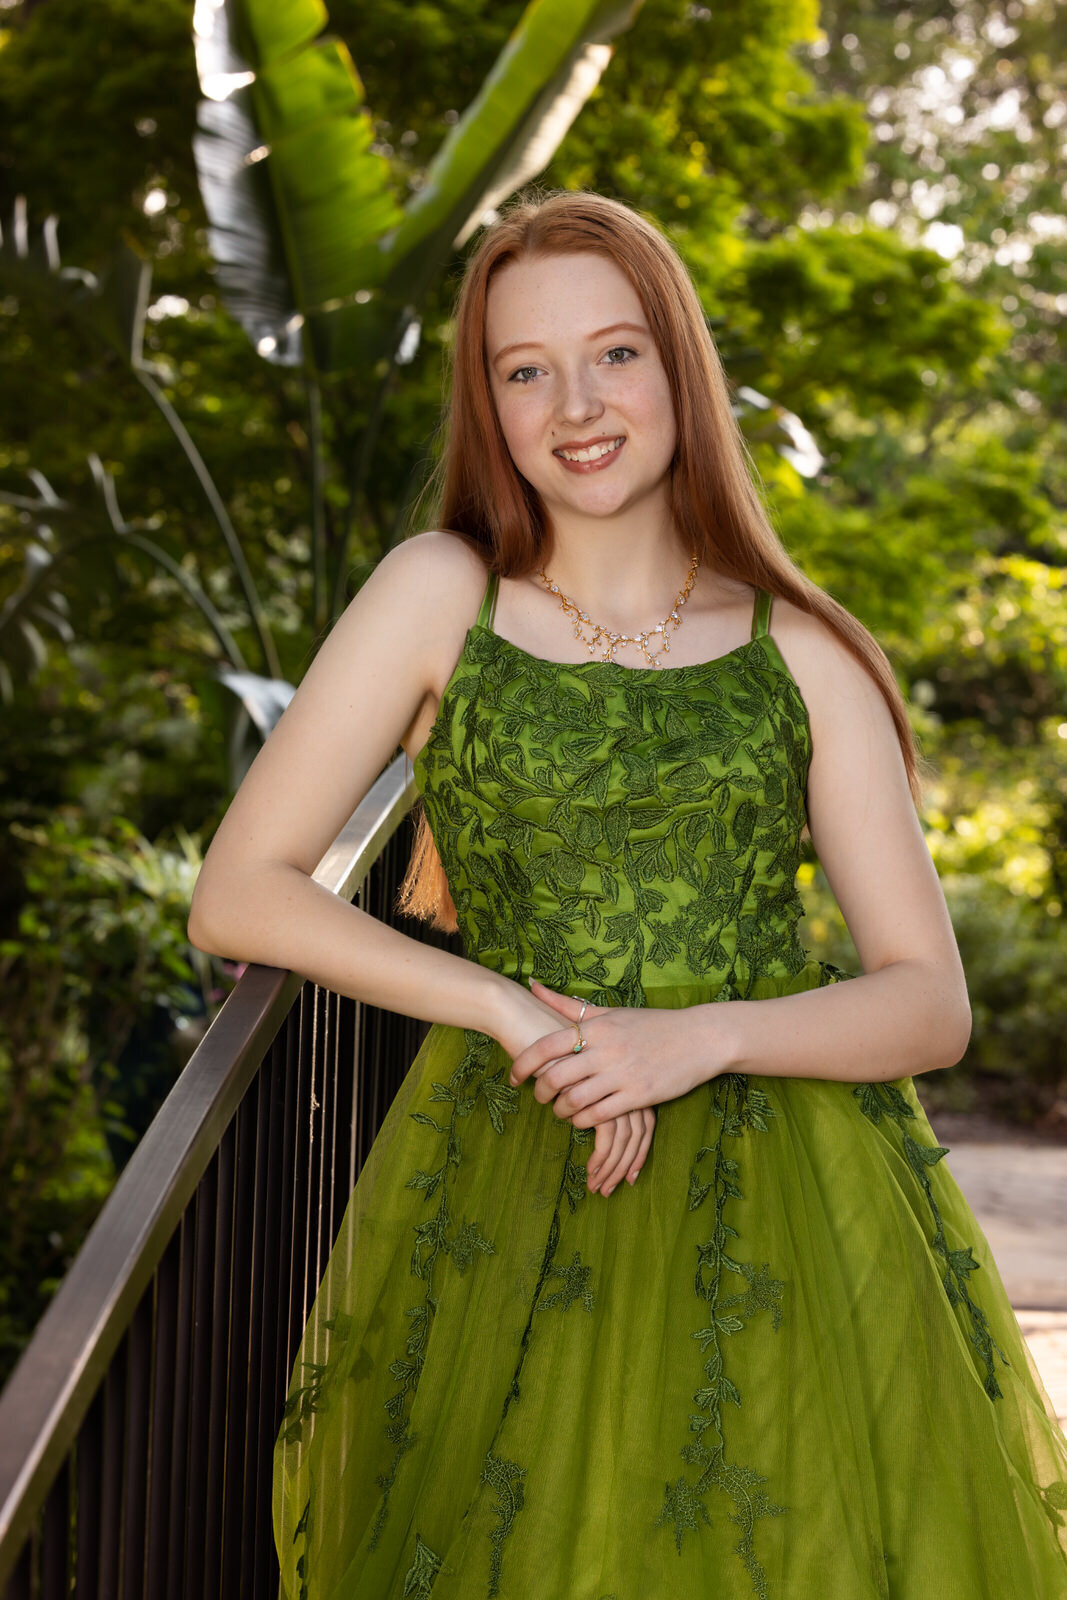 senior-girl-in-green-dress-leaning-on-fence-with-greenery-surround